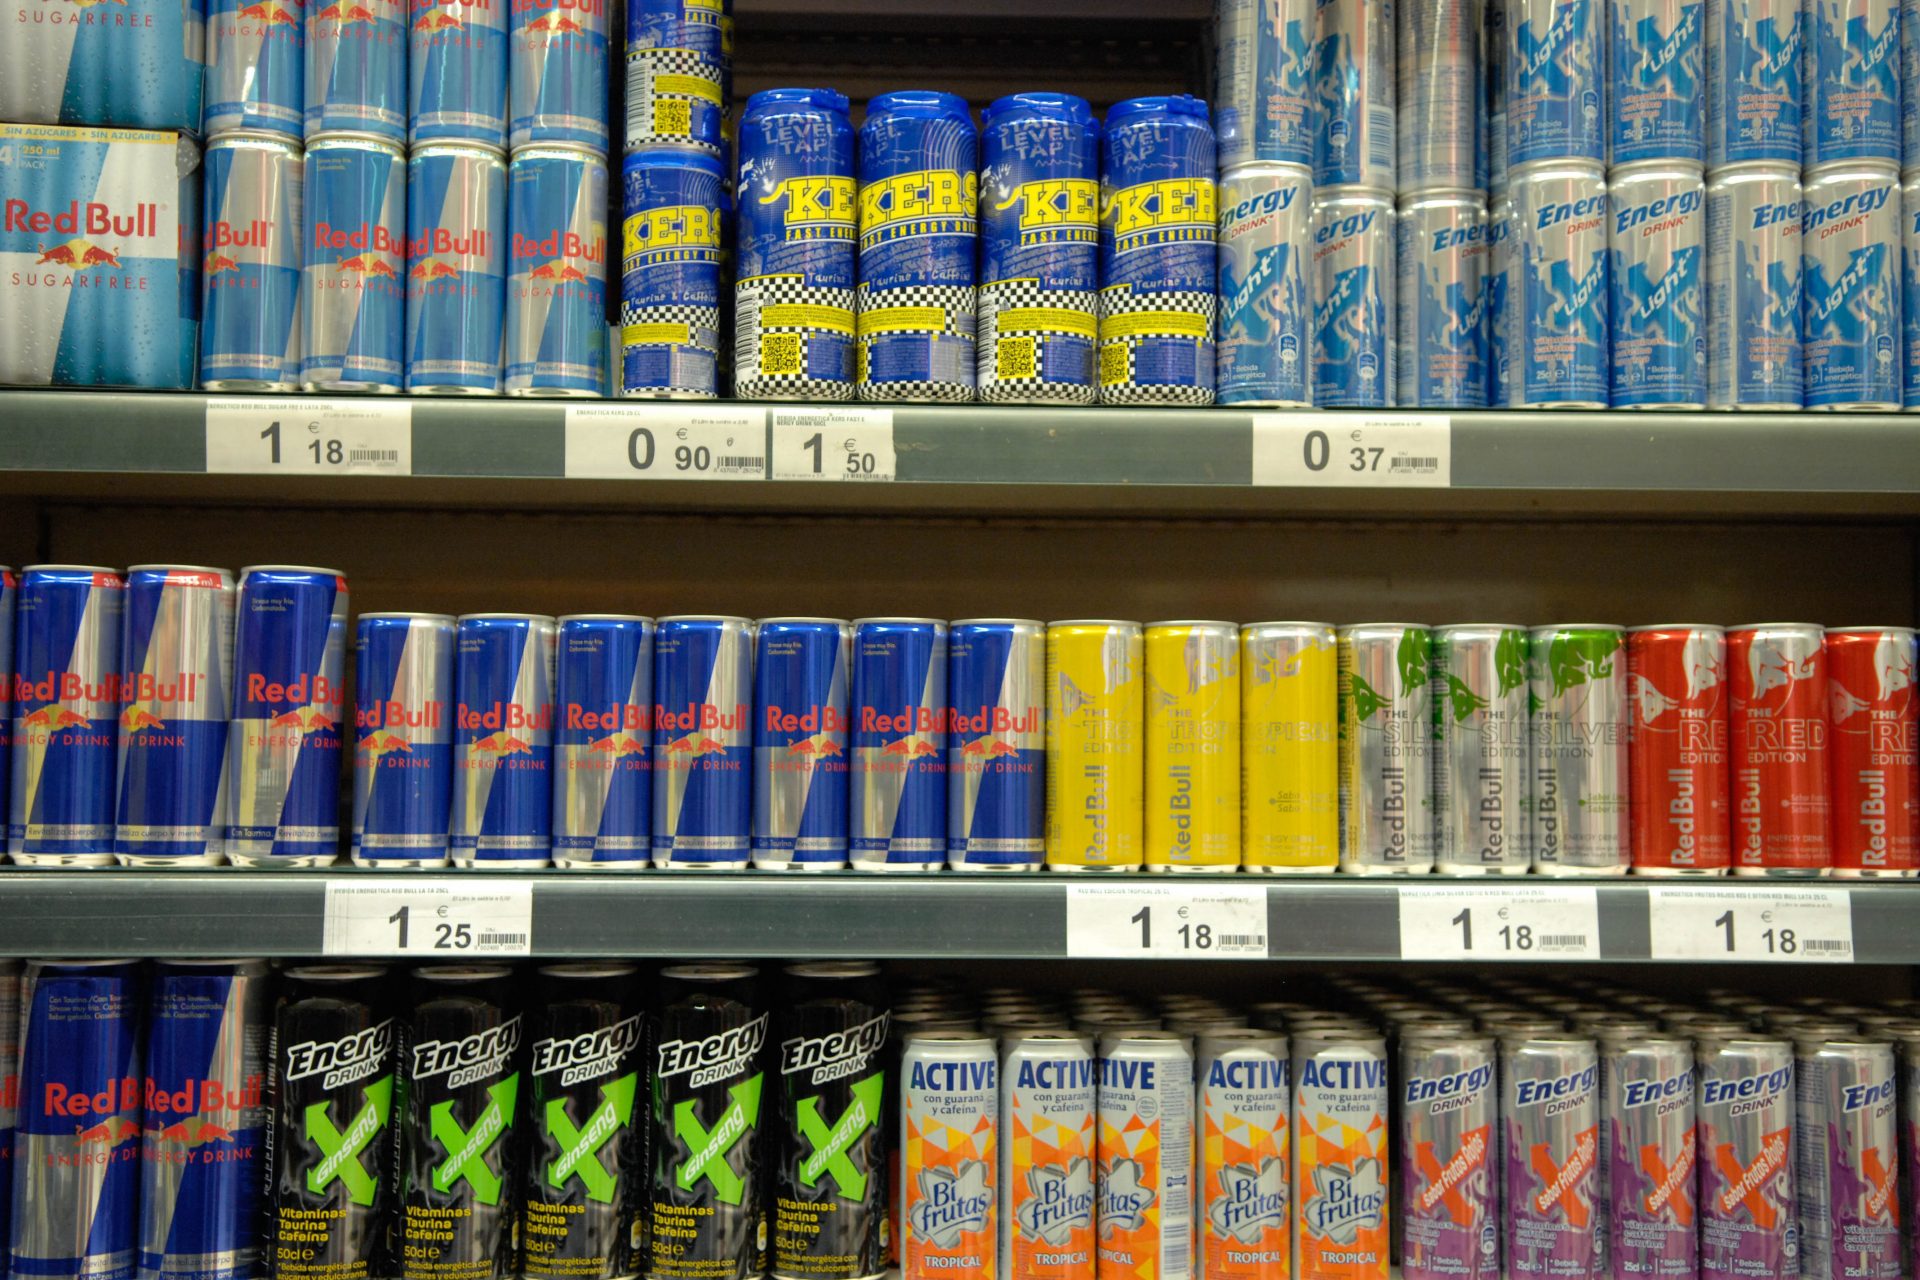 Energy drinks are more dangerous than you think